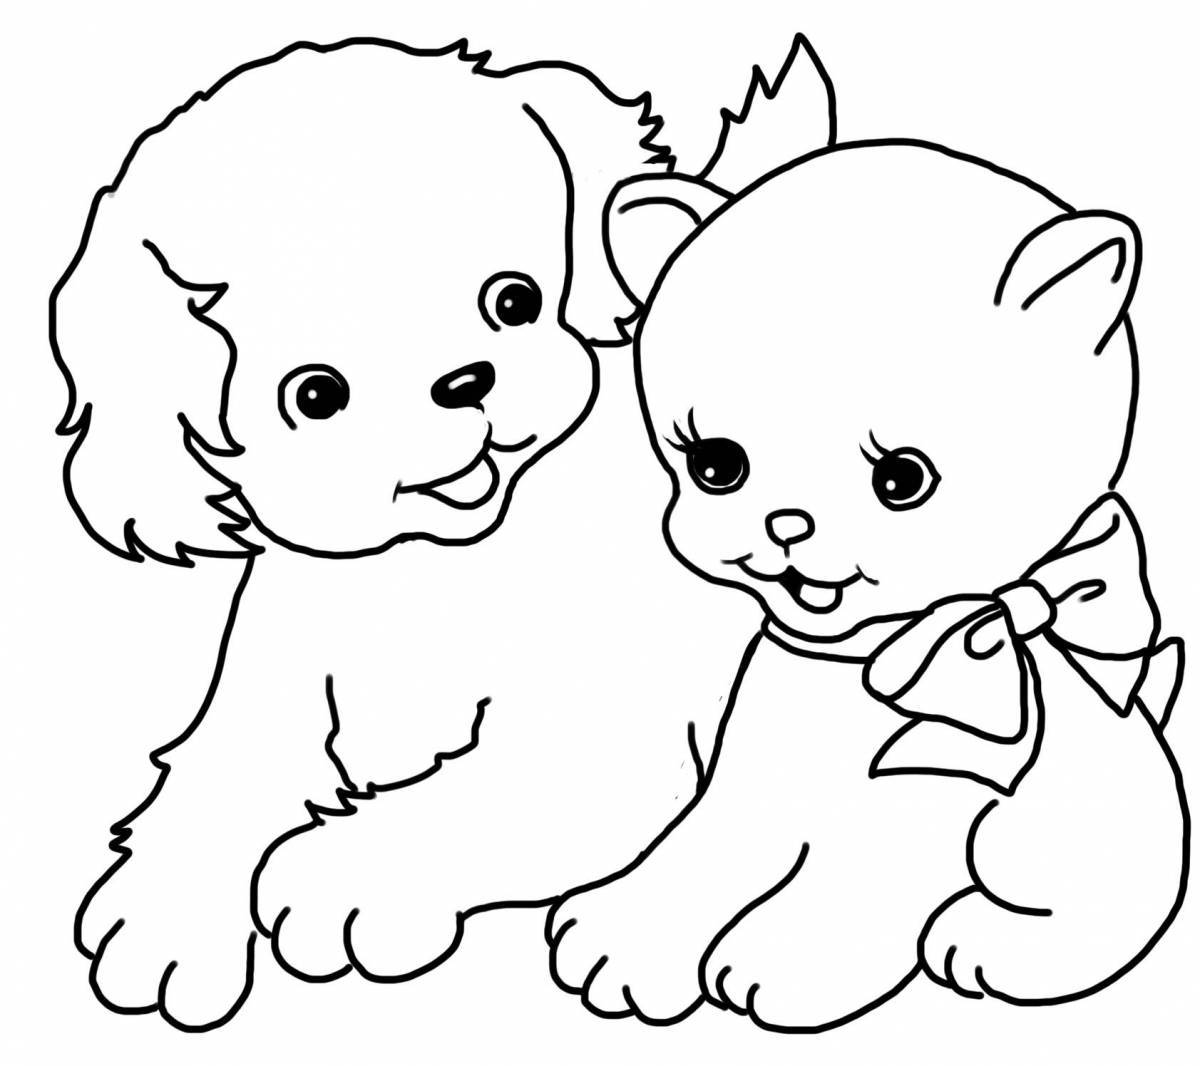 Coloring page energetic dog and cat